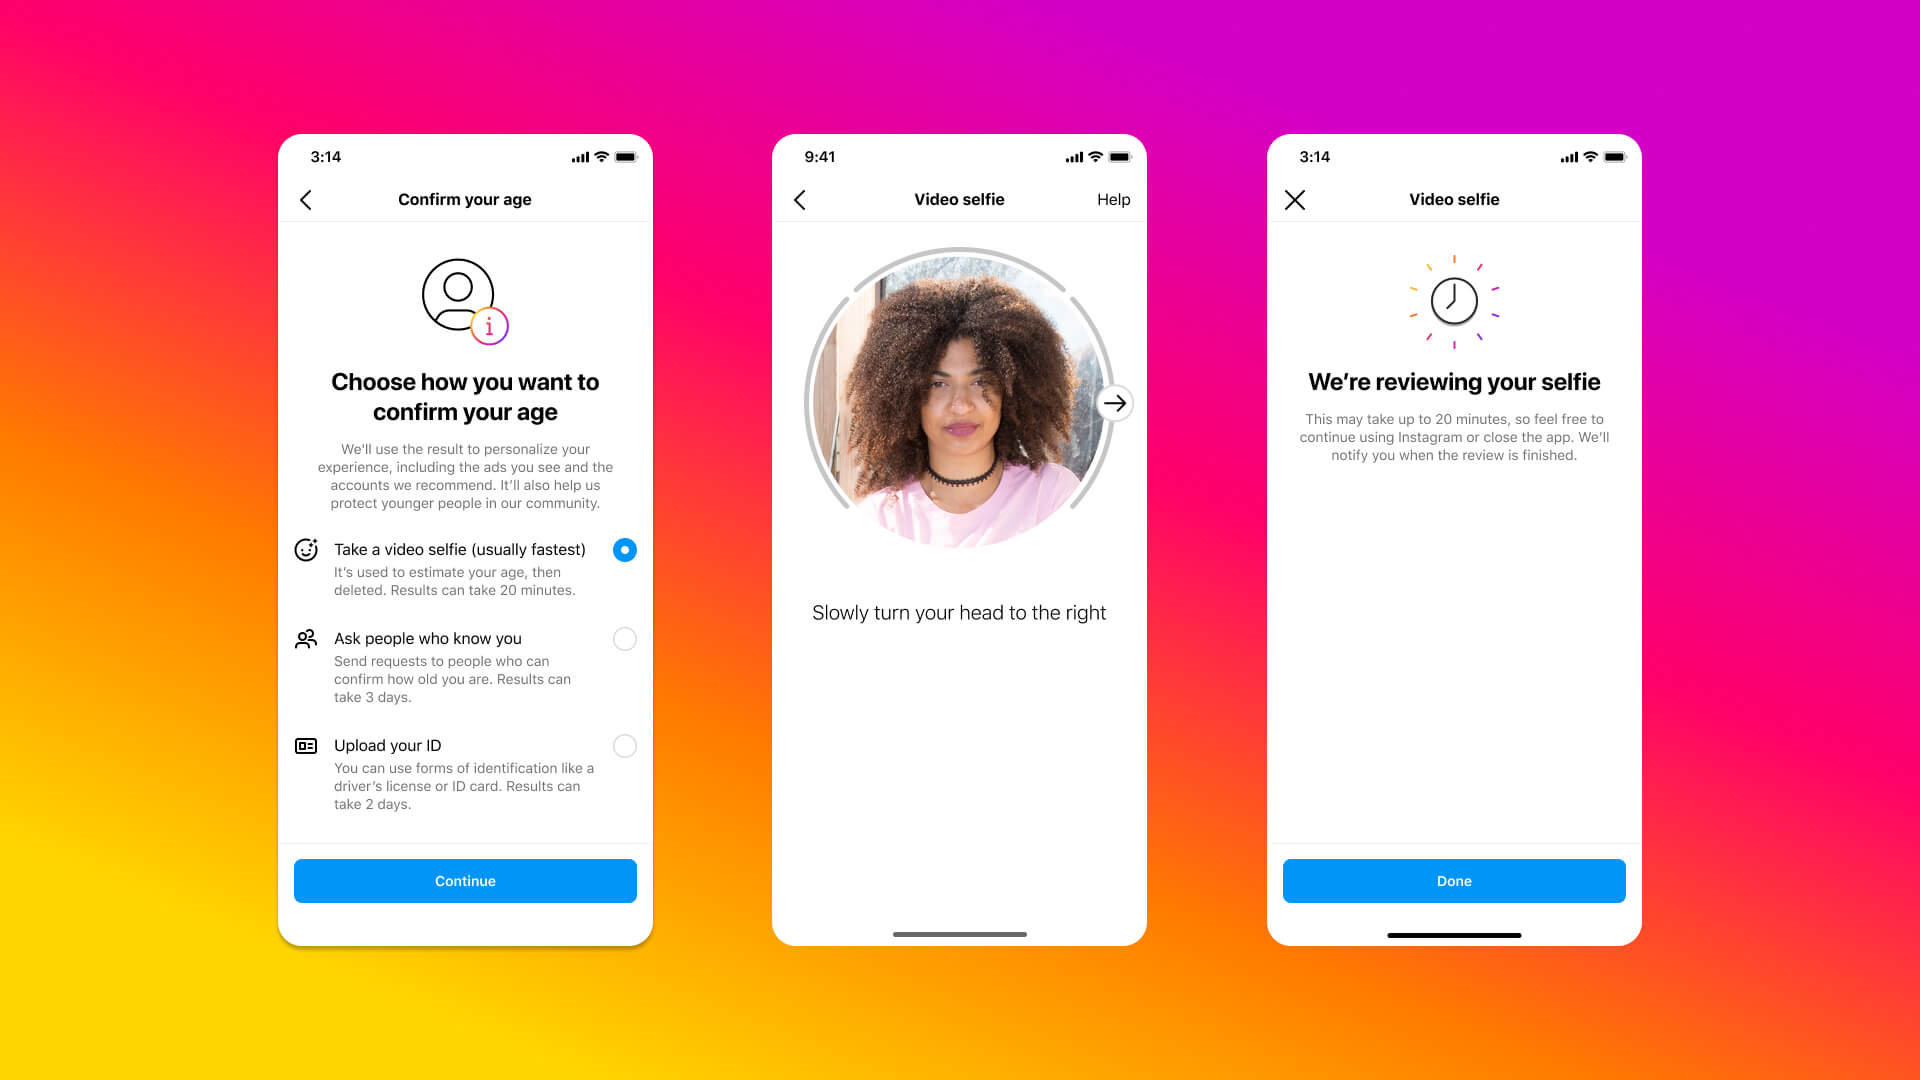 Instagram tests new age verification tools for 18 and over accounts, including video selfies – US News Mail Tech